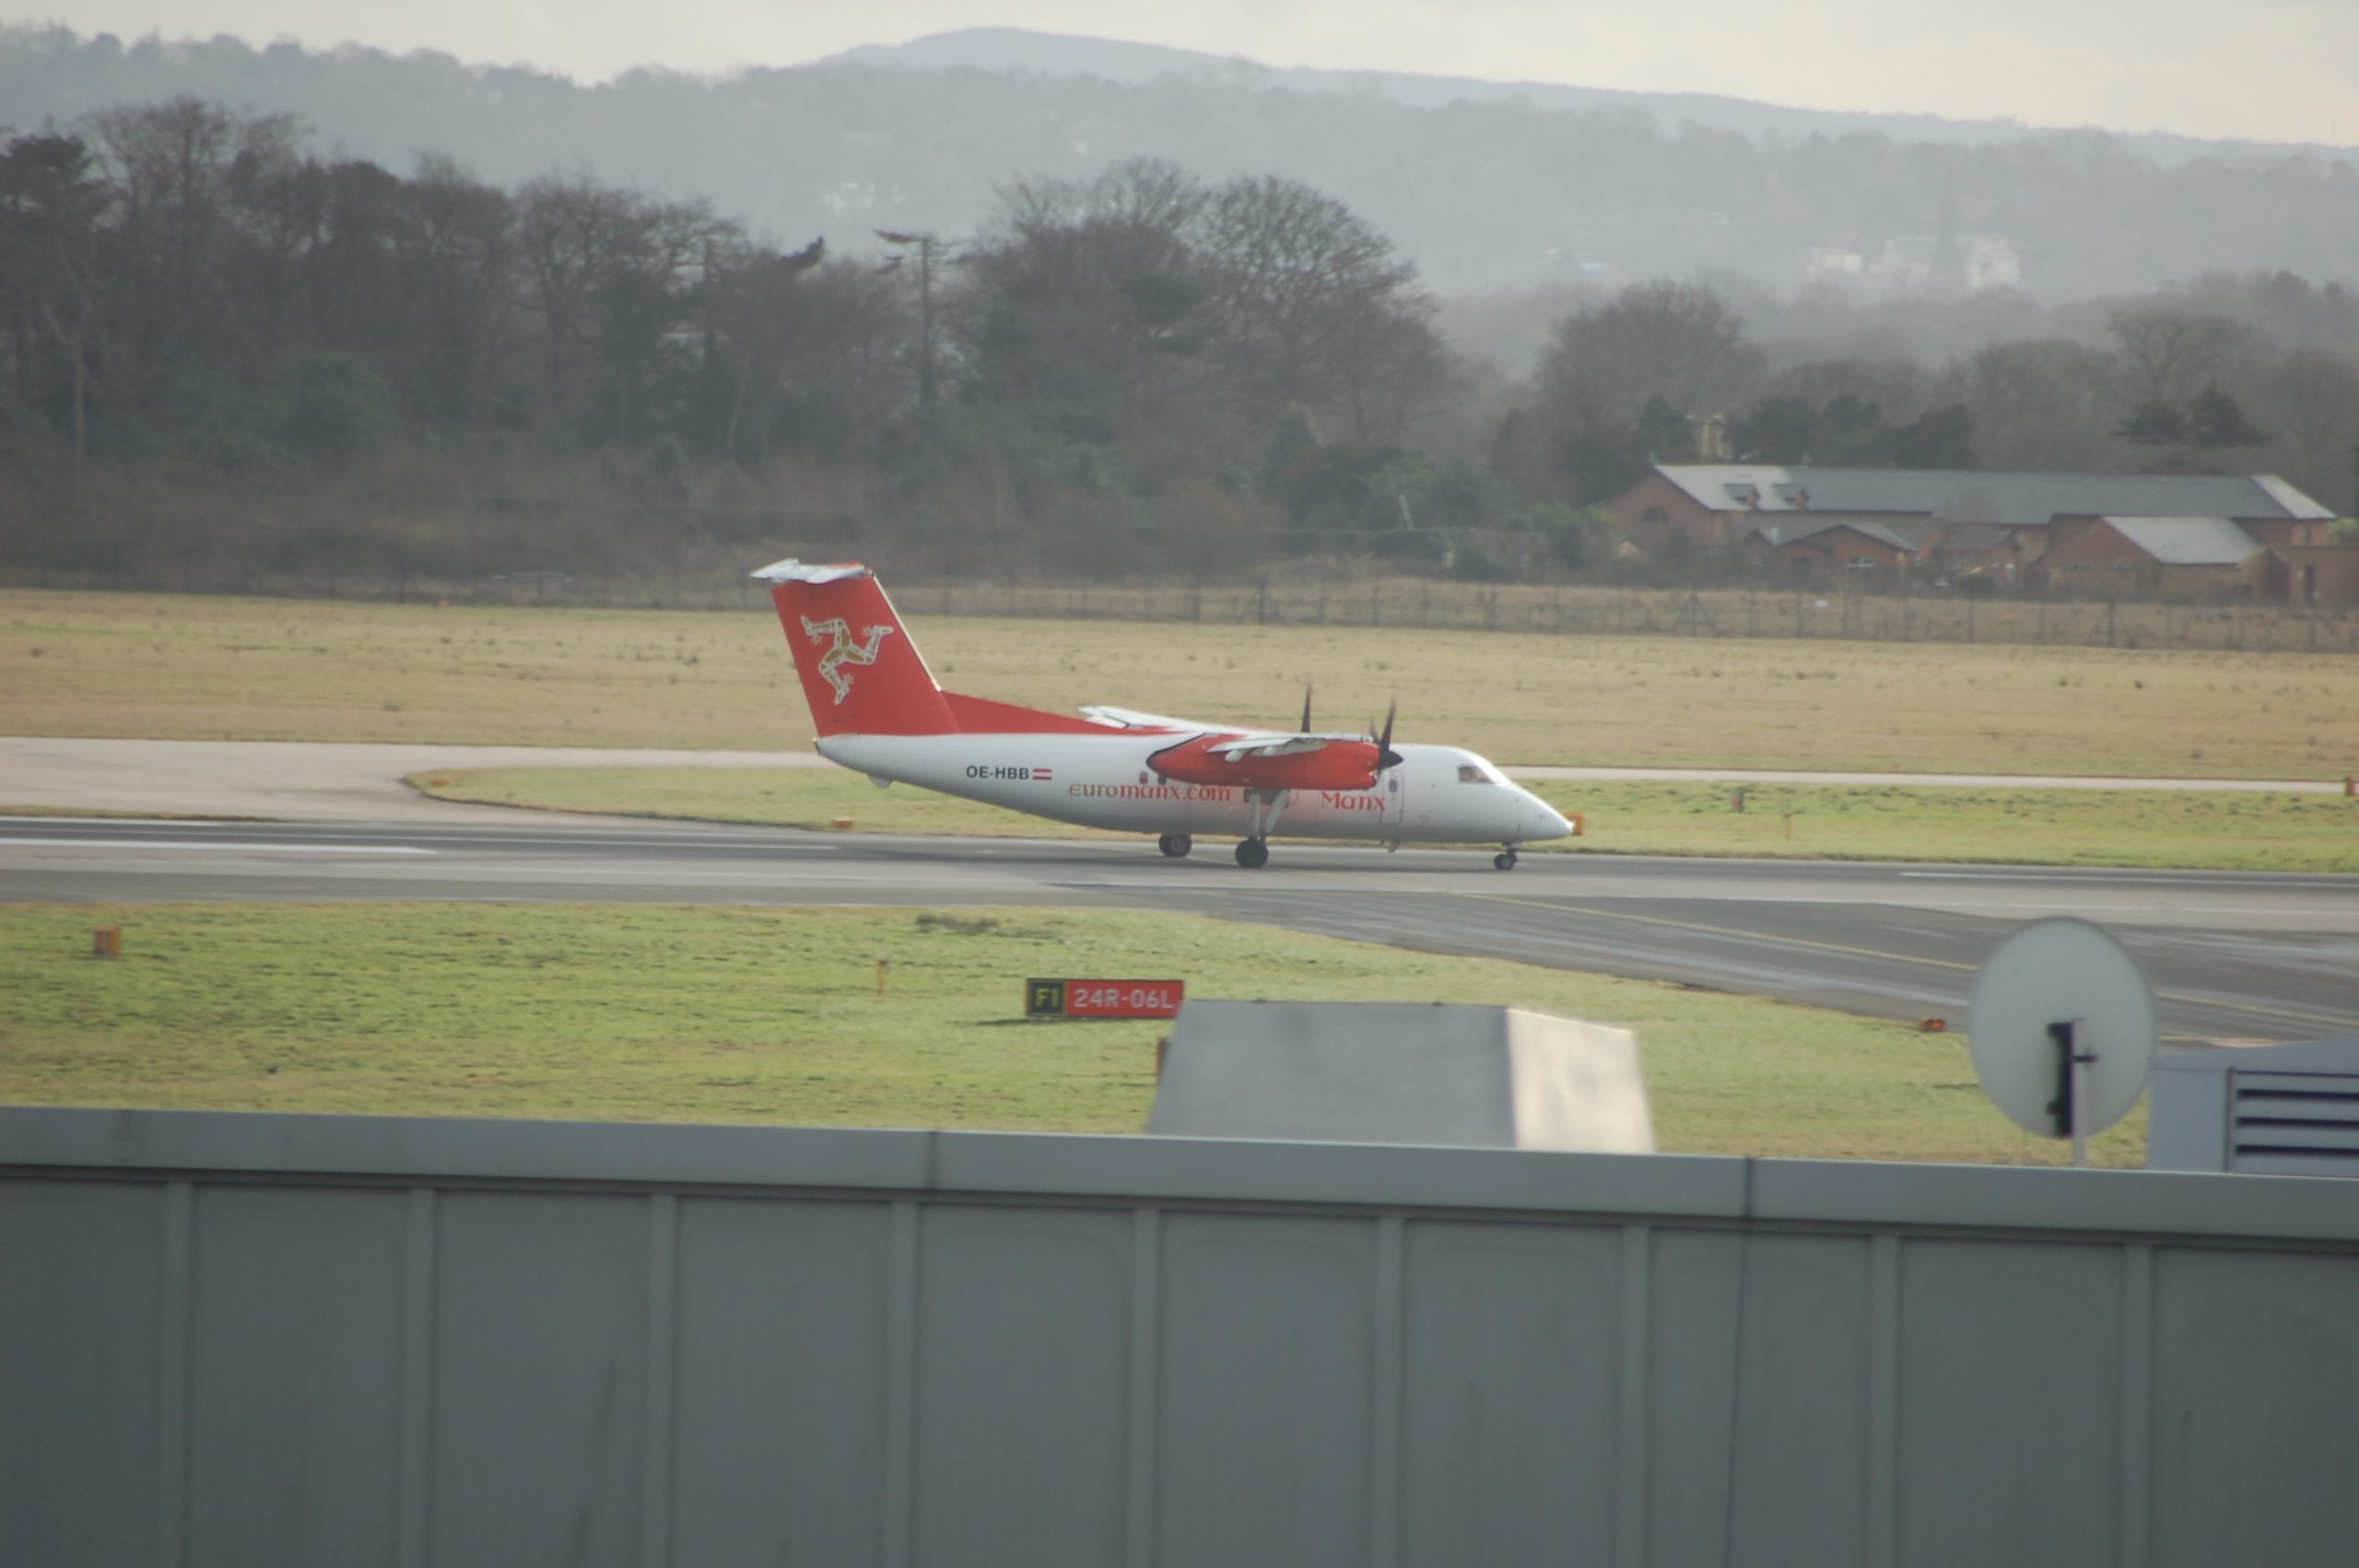 Side view of a high-winged, twin propellor engined airliner taxiing from left to right after landing on a runway. The plane is mostly white, with red "euromanx.com" on the lower rear fuselage, and "Manx" titles on the lower forward fuselage. The registration "OE-HBB" is on the rear fuselage in black, next to an Austrian flag (equal red-white-red horizontal bands). The tail and engine pods are red, with 3 goldenn, armoured legs, joined at the hip and running in a circle on the tail. In the foreground, the lower quarter of the frame is a grey building, with grass beyond that running to the runway. In the background, large grassed areas lead off to trees at the airfield perimeter. On the middle right of the frame, a large brown brick building with a sloping black roof is visible. Rolling hills beyond that slowly vanish in to the hazy grey sky.